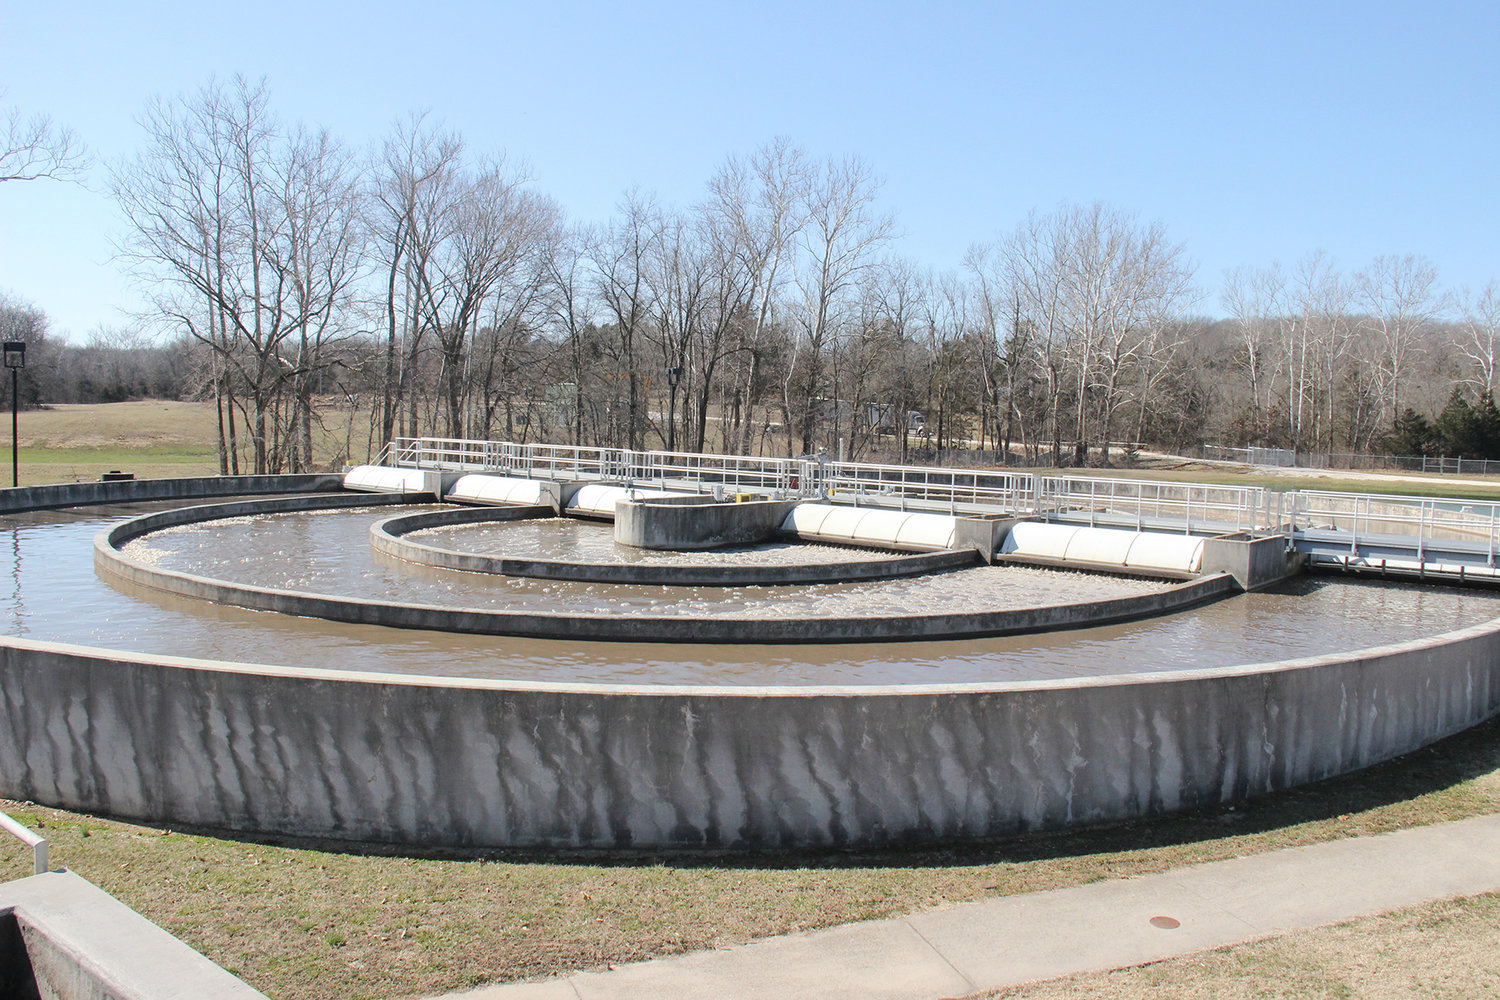 The Warrenton Wastewater Treatment Plant also serves the city of Truesdale. The smaller town is examining alternate options for sewage treatment.